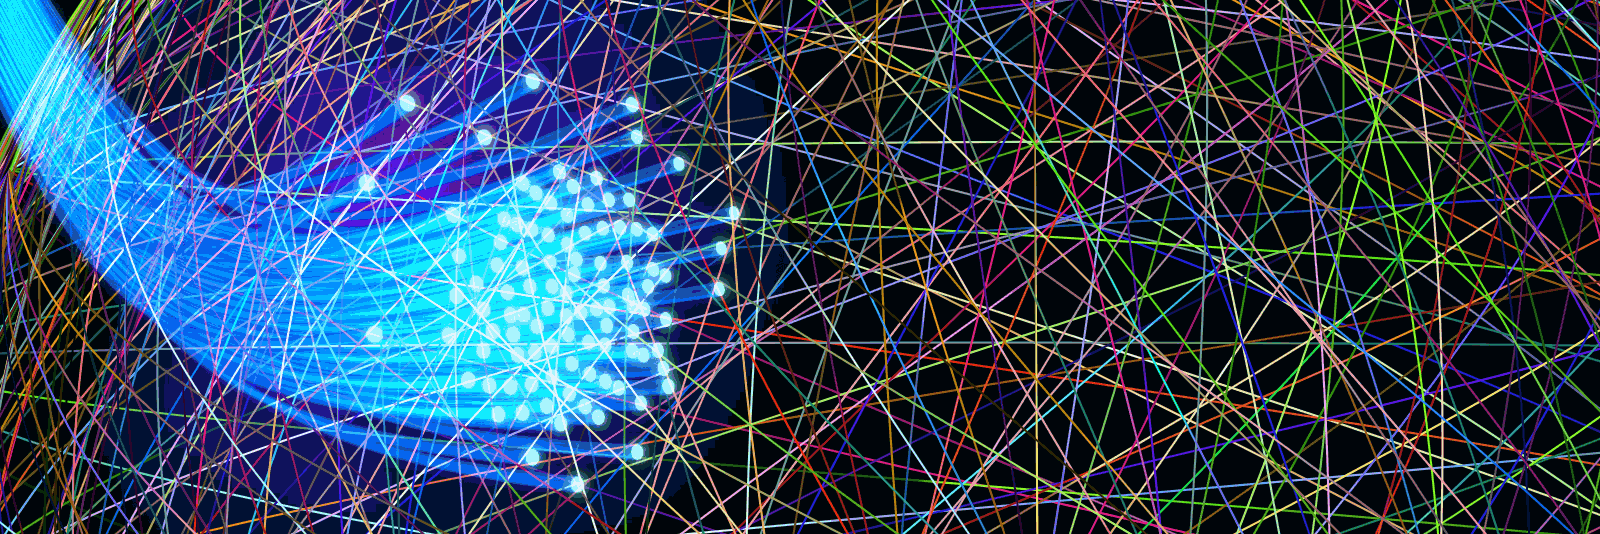 Network graphic with some lit-up fiber-optic strands